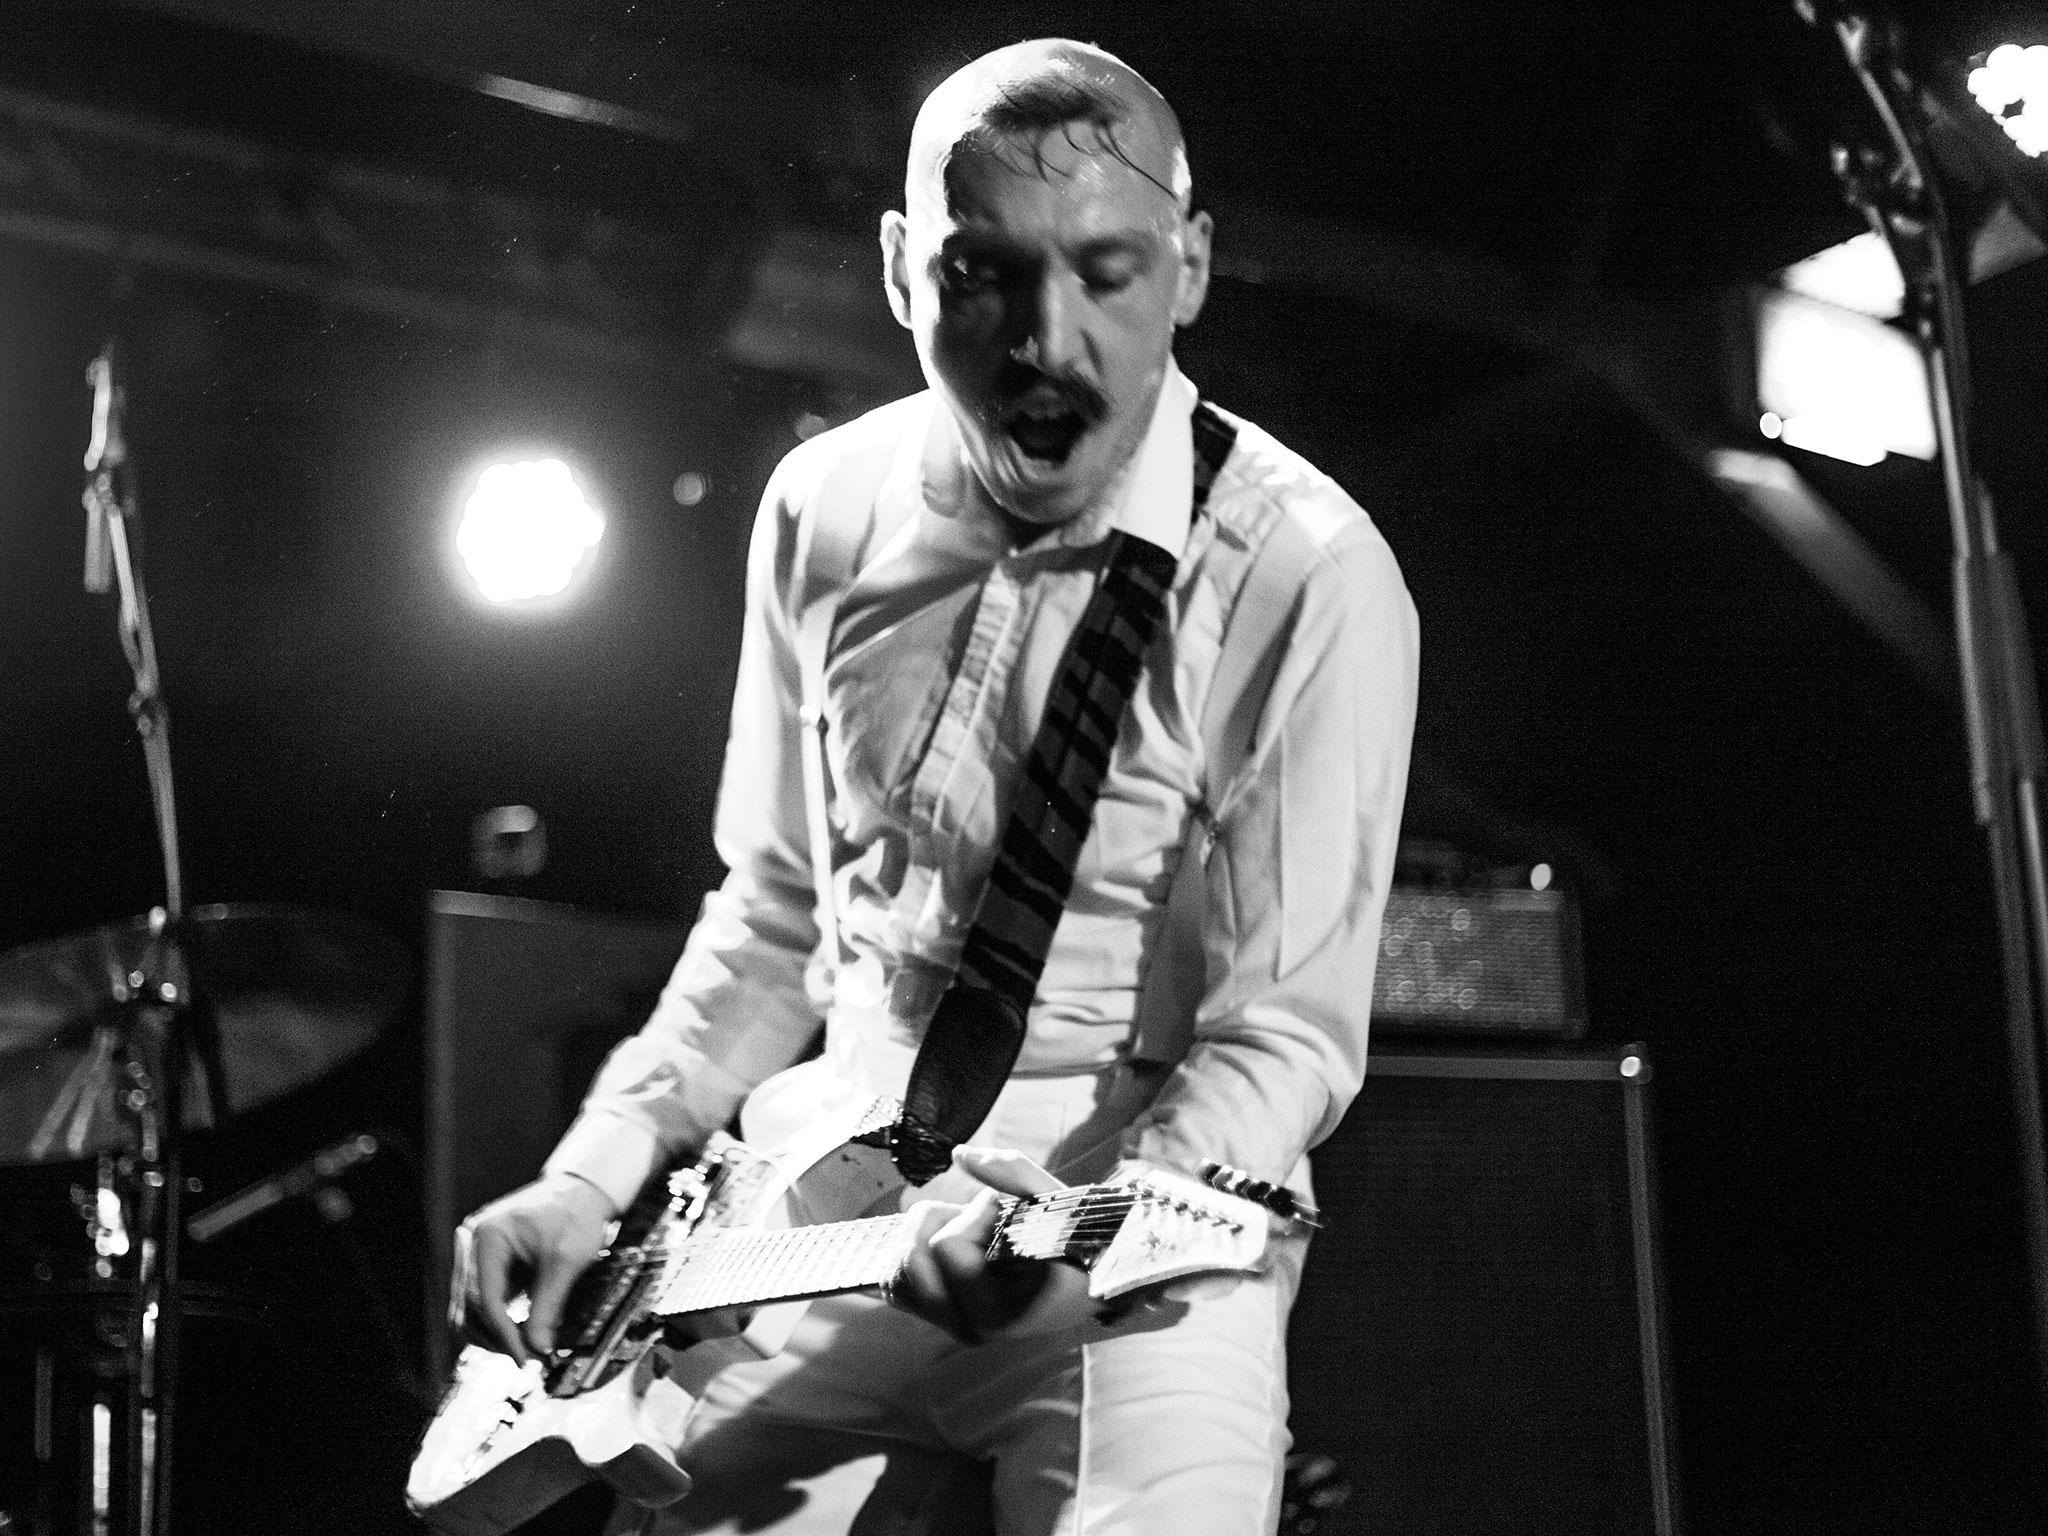 Jamie Lenman; one of the country's finest songwriters